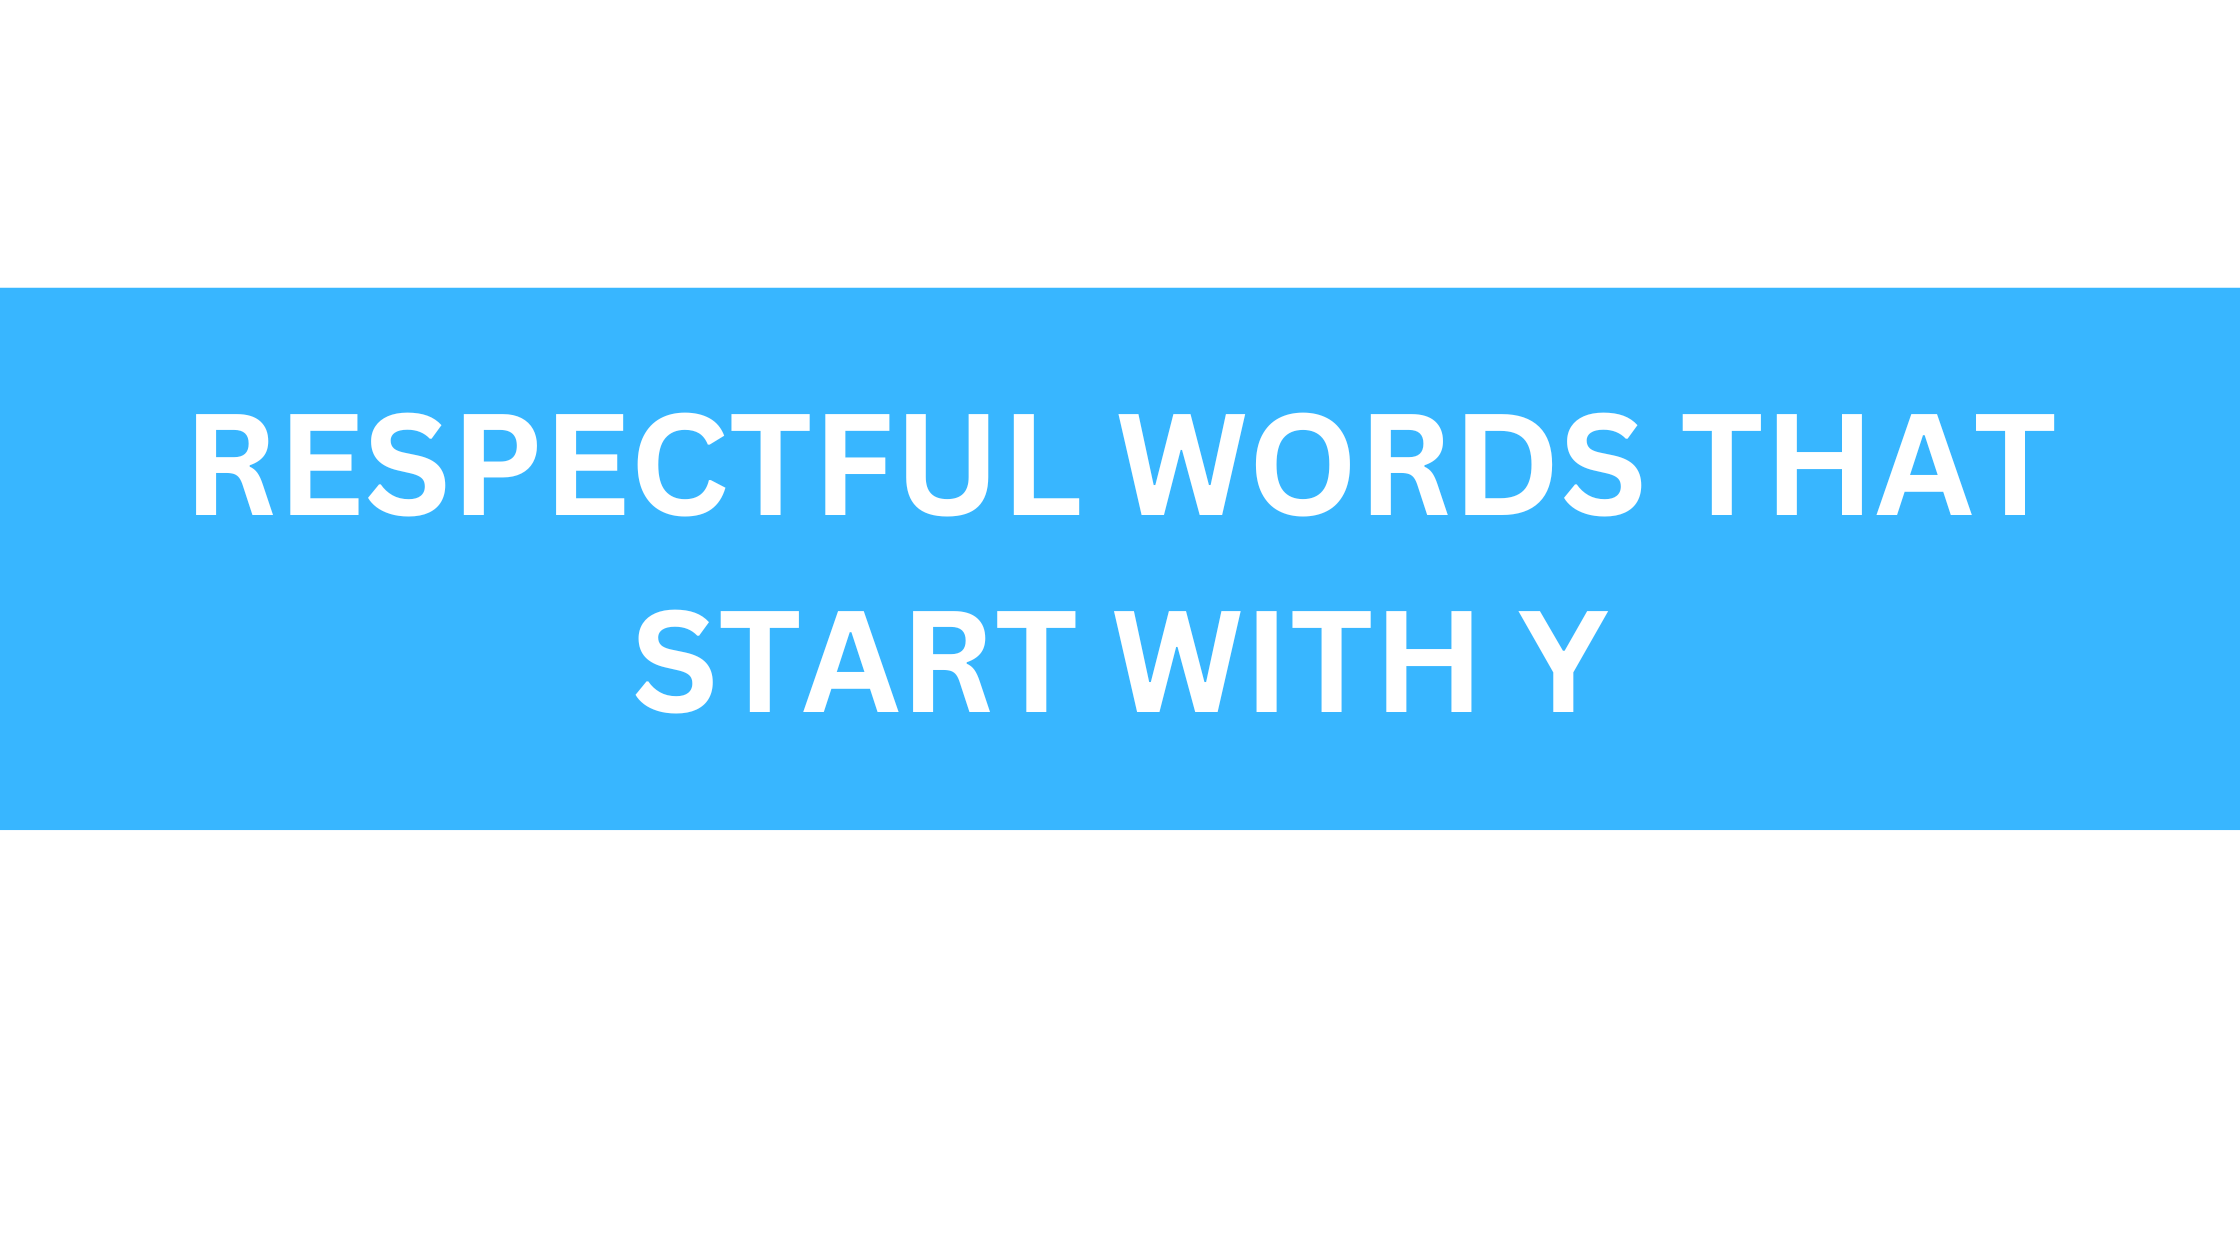 respectful words that start with y